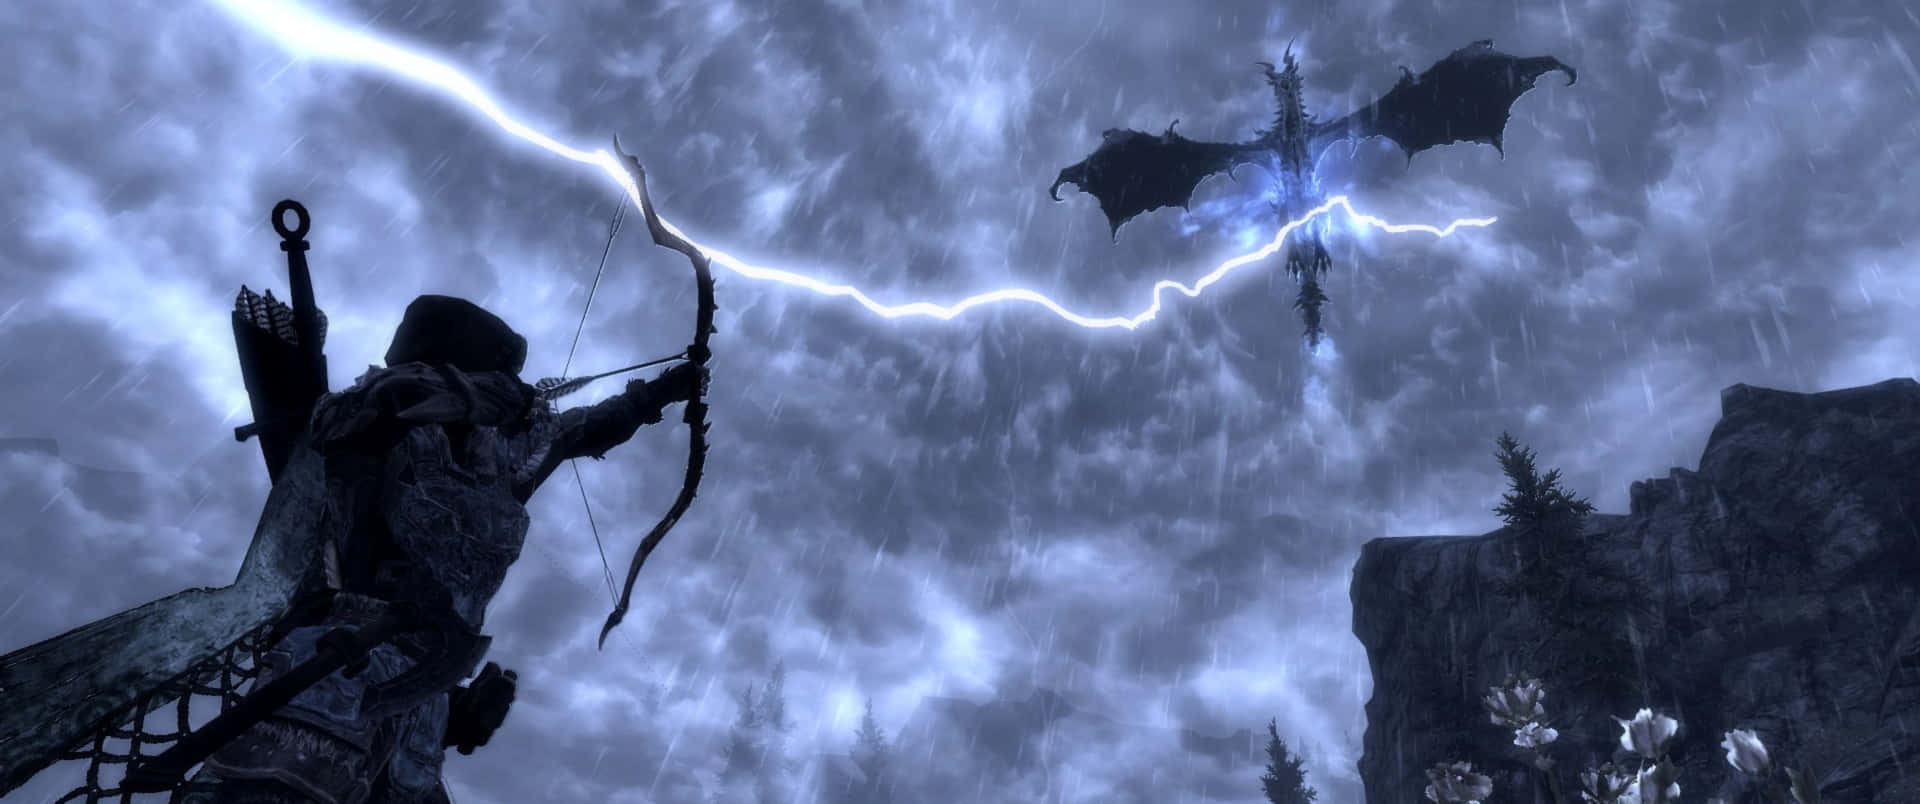 “Explore the world of Skyrim with this immersive 3440x1440p resolution wallpaper.”